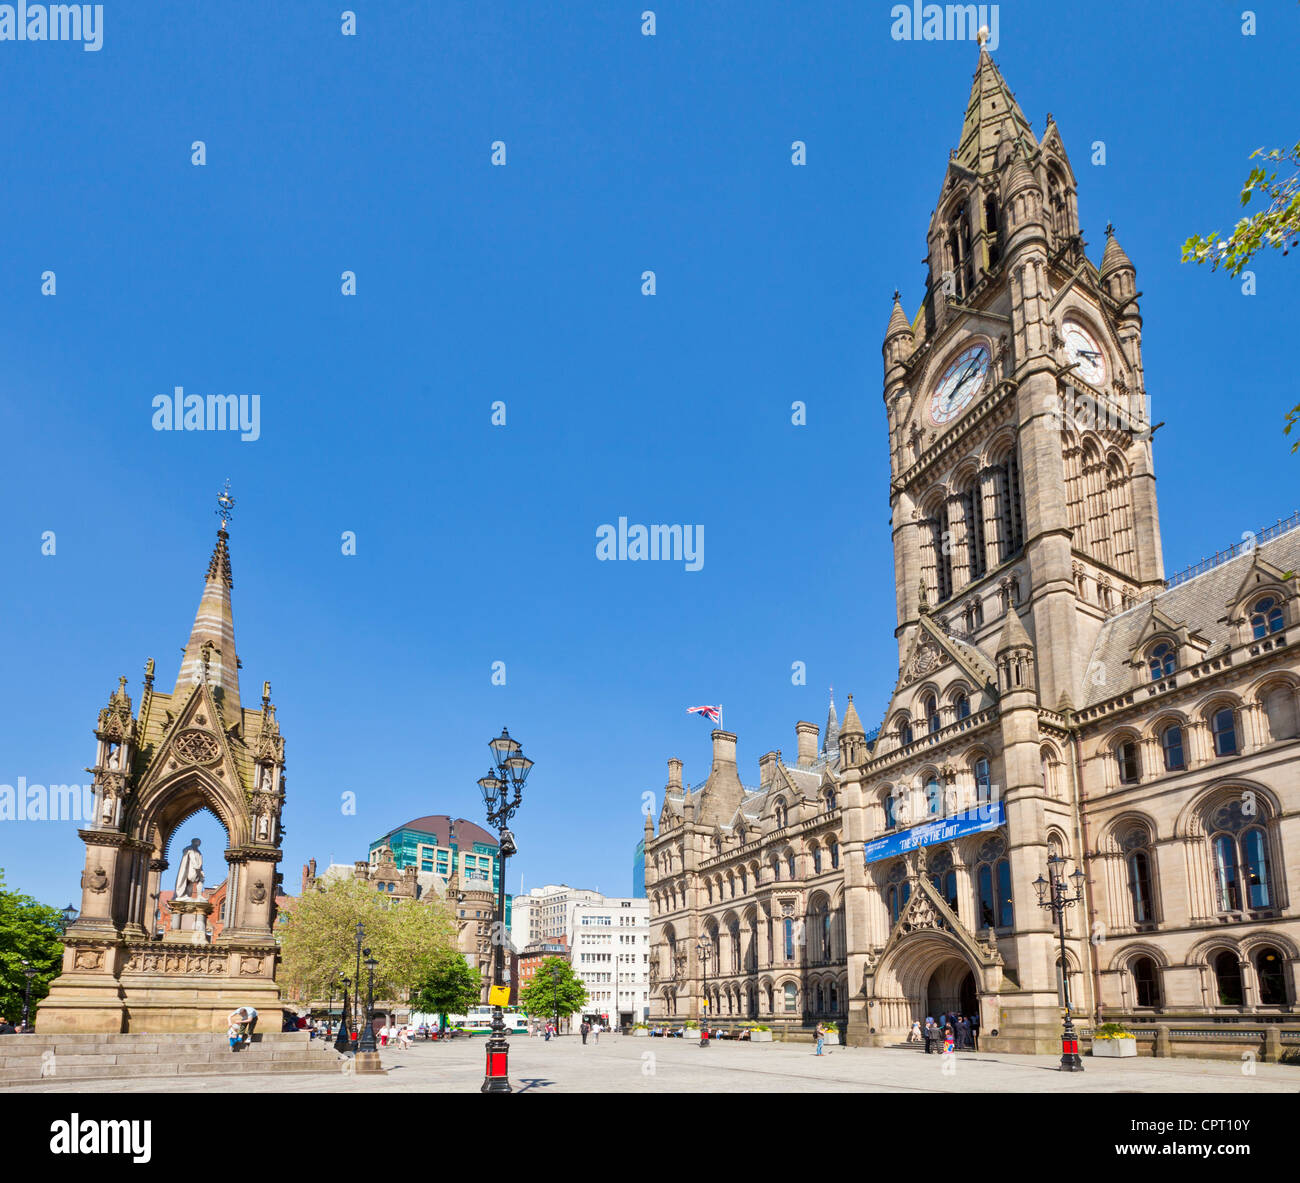 manchester town hall albert square Manchester city centre Greater Manchester England UK GB EU Europe Stock Photo